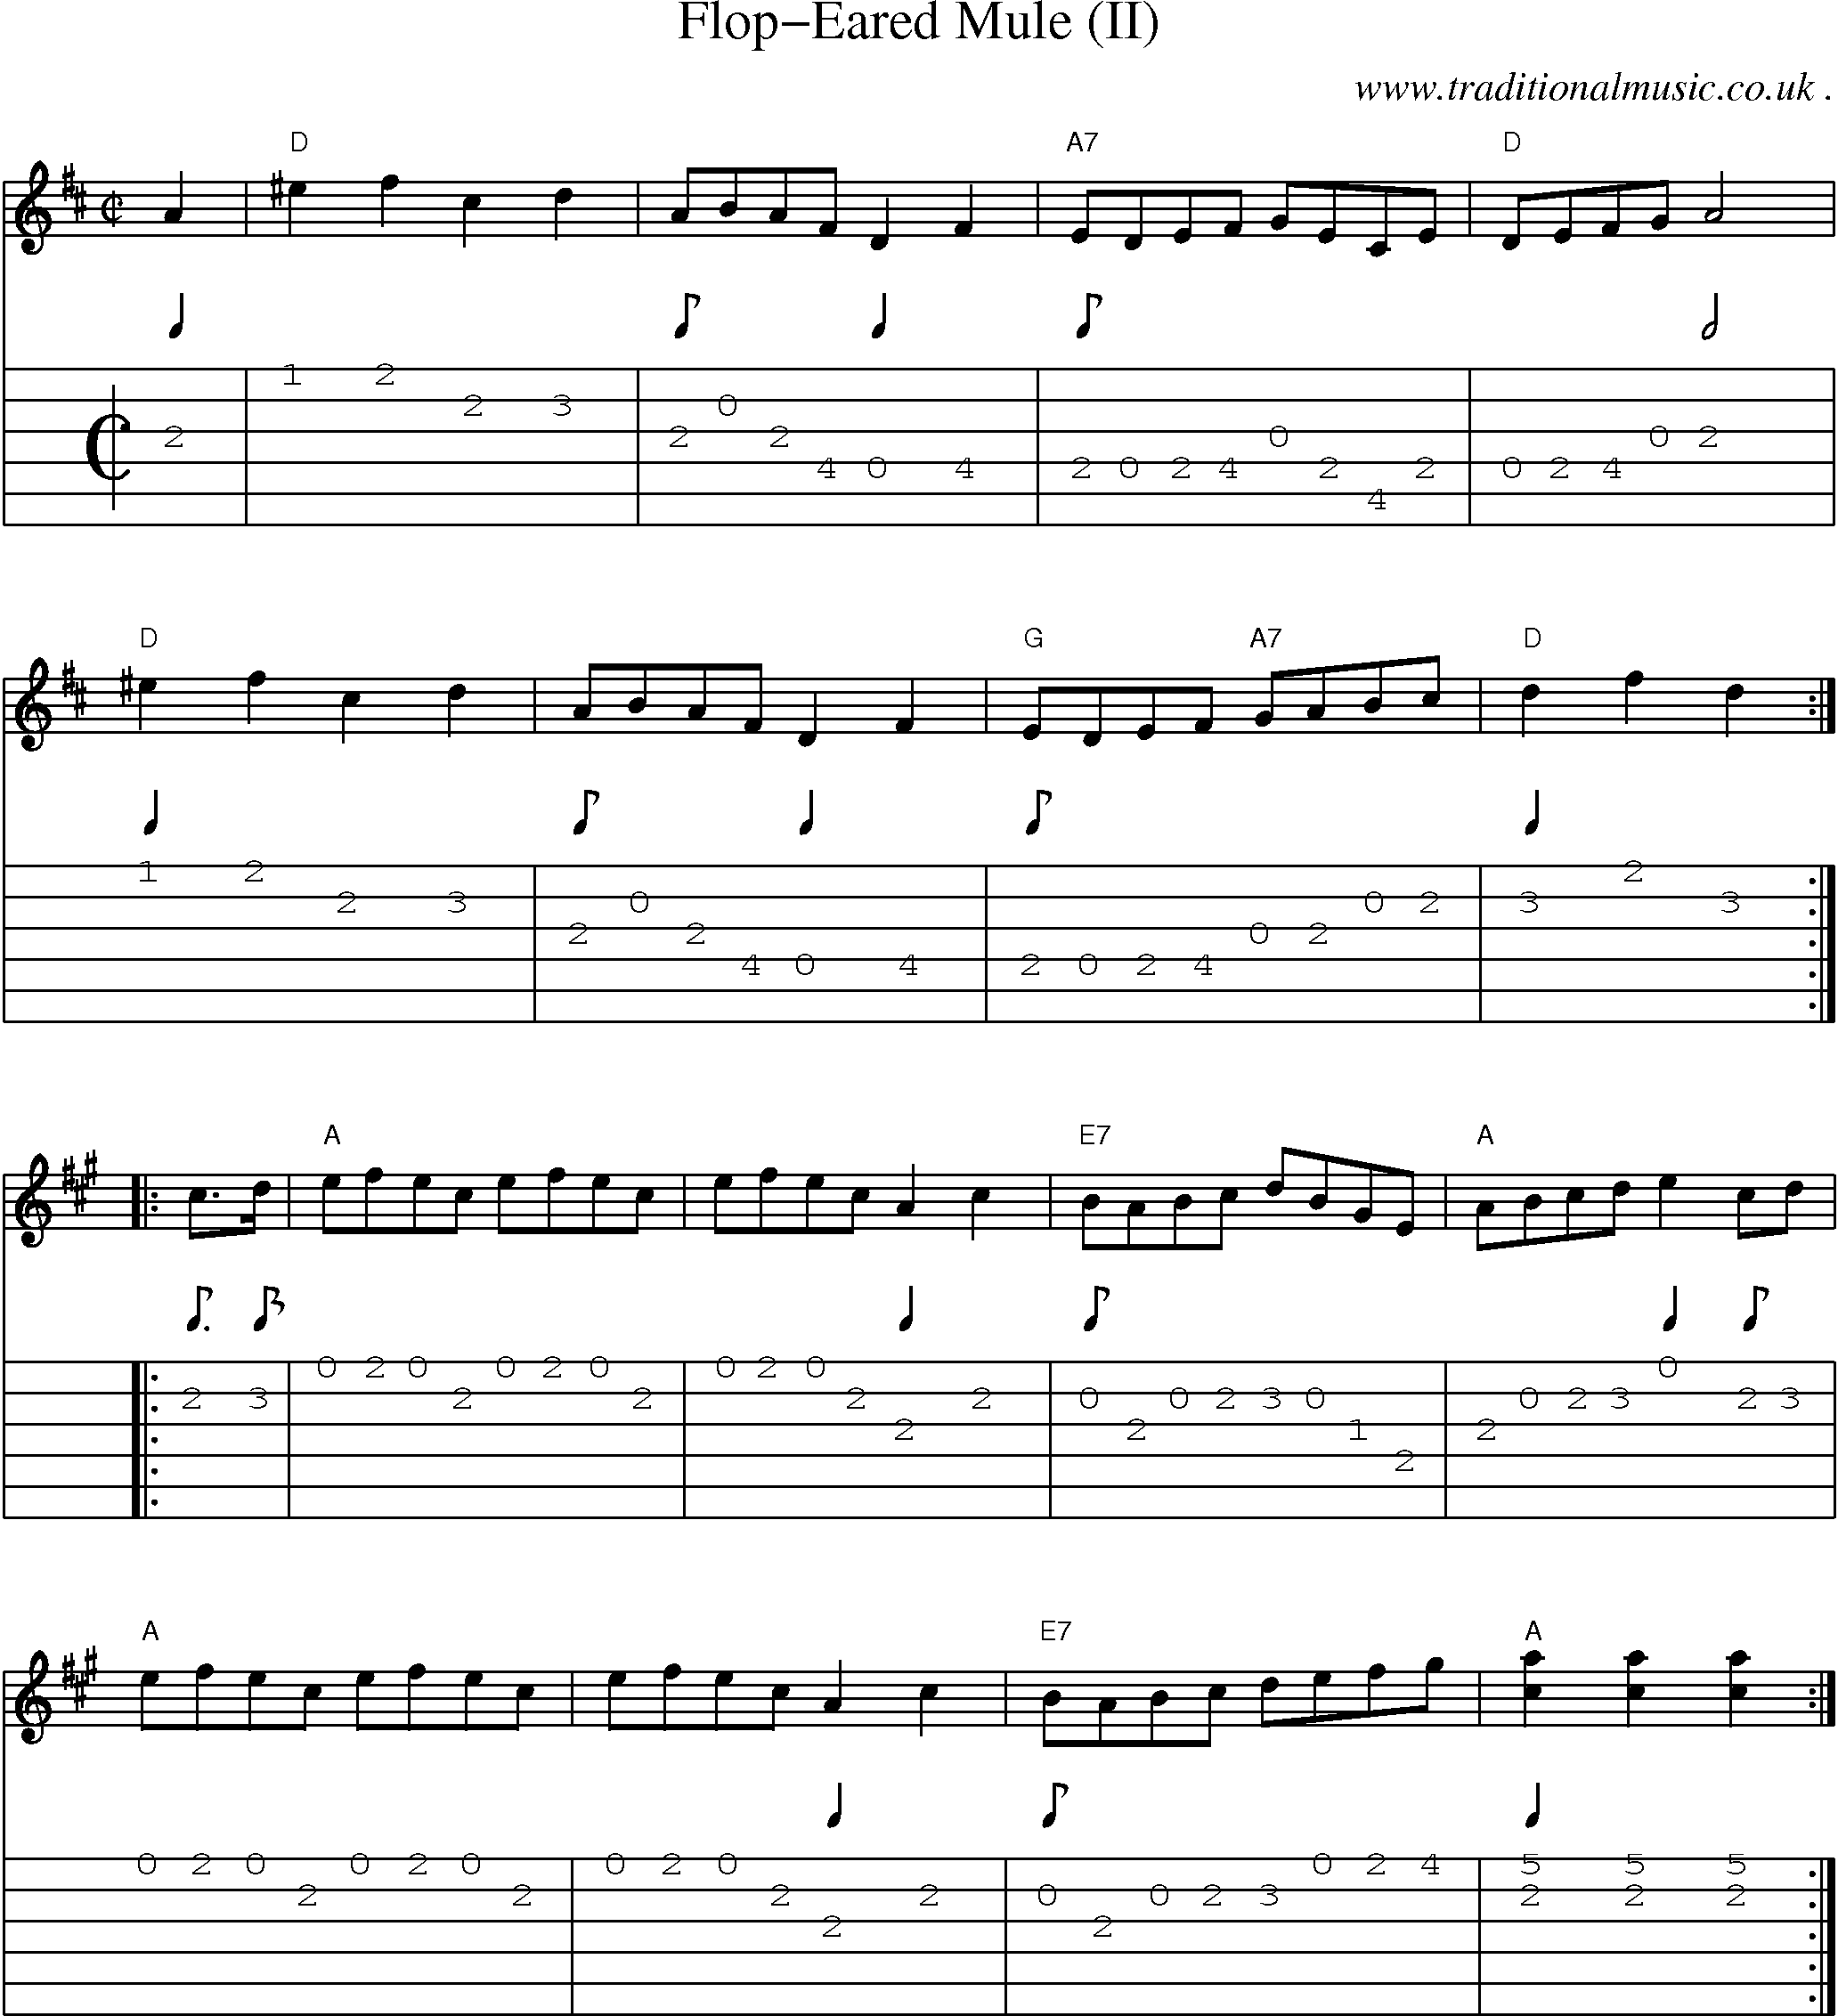 Music Score and Guitar Tabs for Flop-eared Mule 2